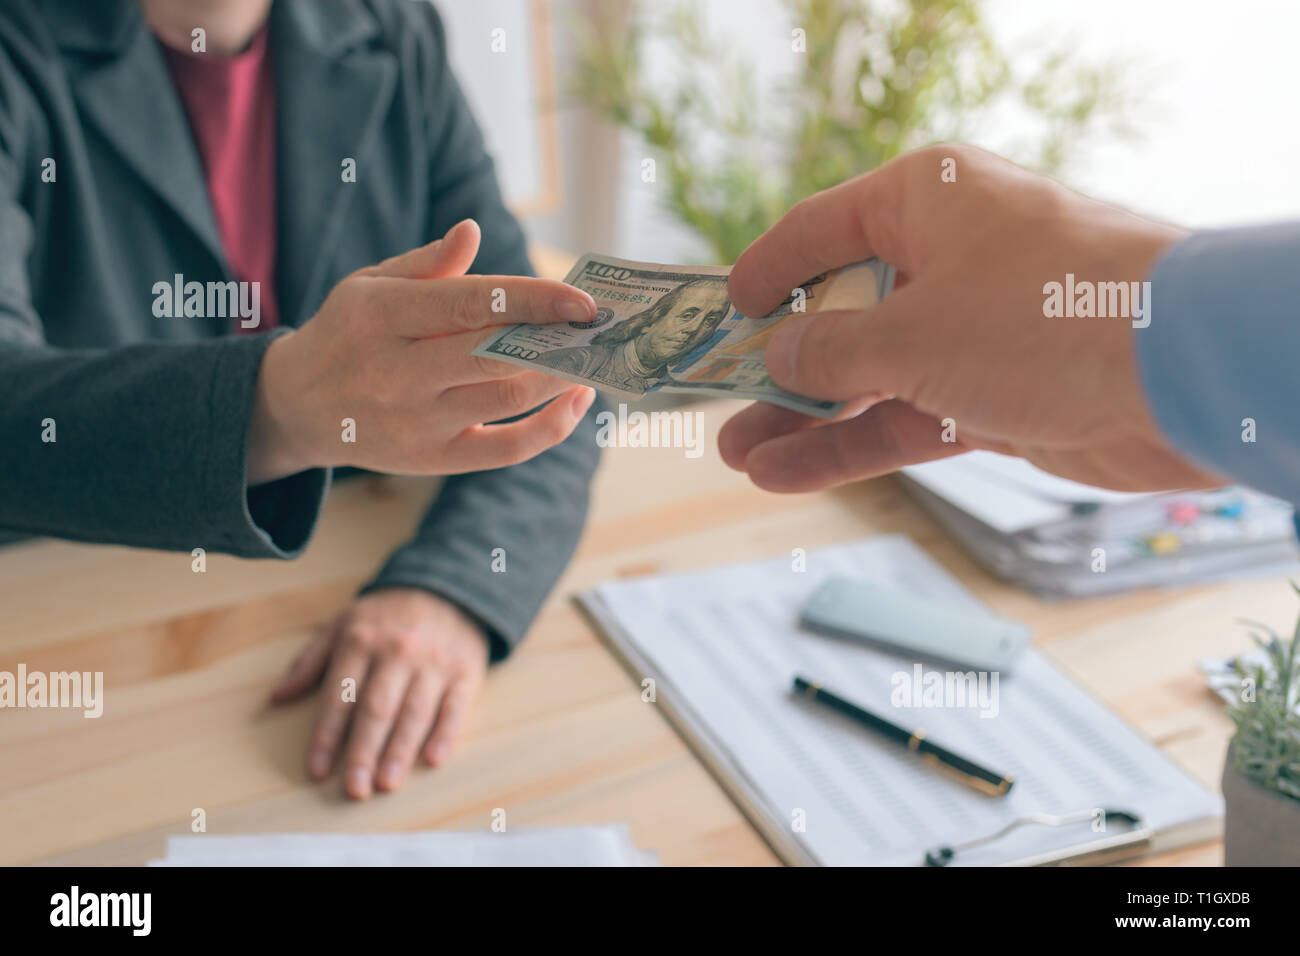 Hush money, bribe and corruption, man offering cash a 100 US dollar paper currency bill to female business person Stock Photo